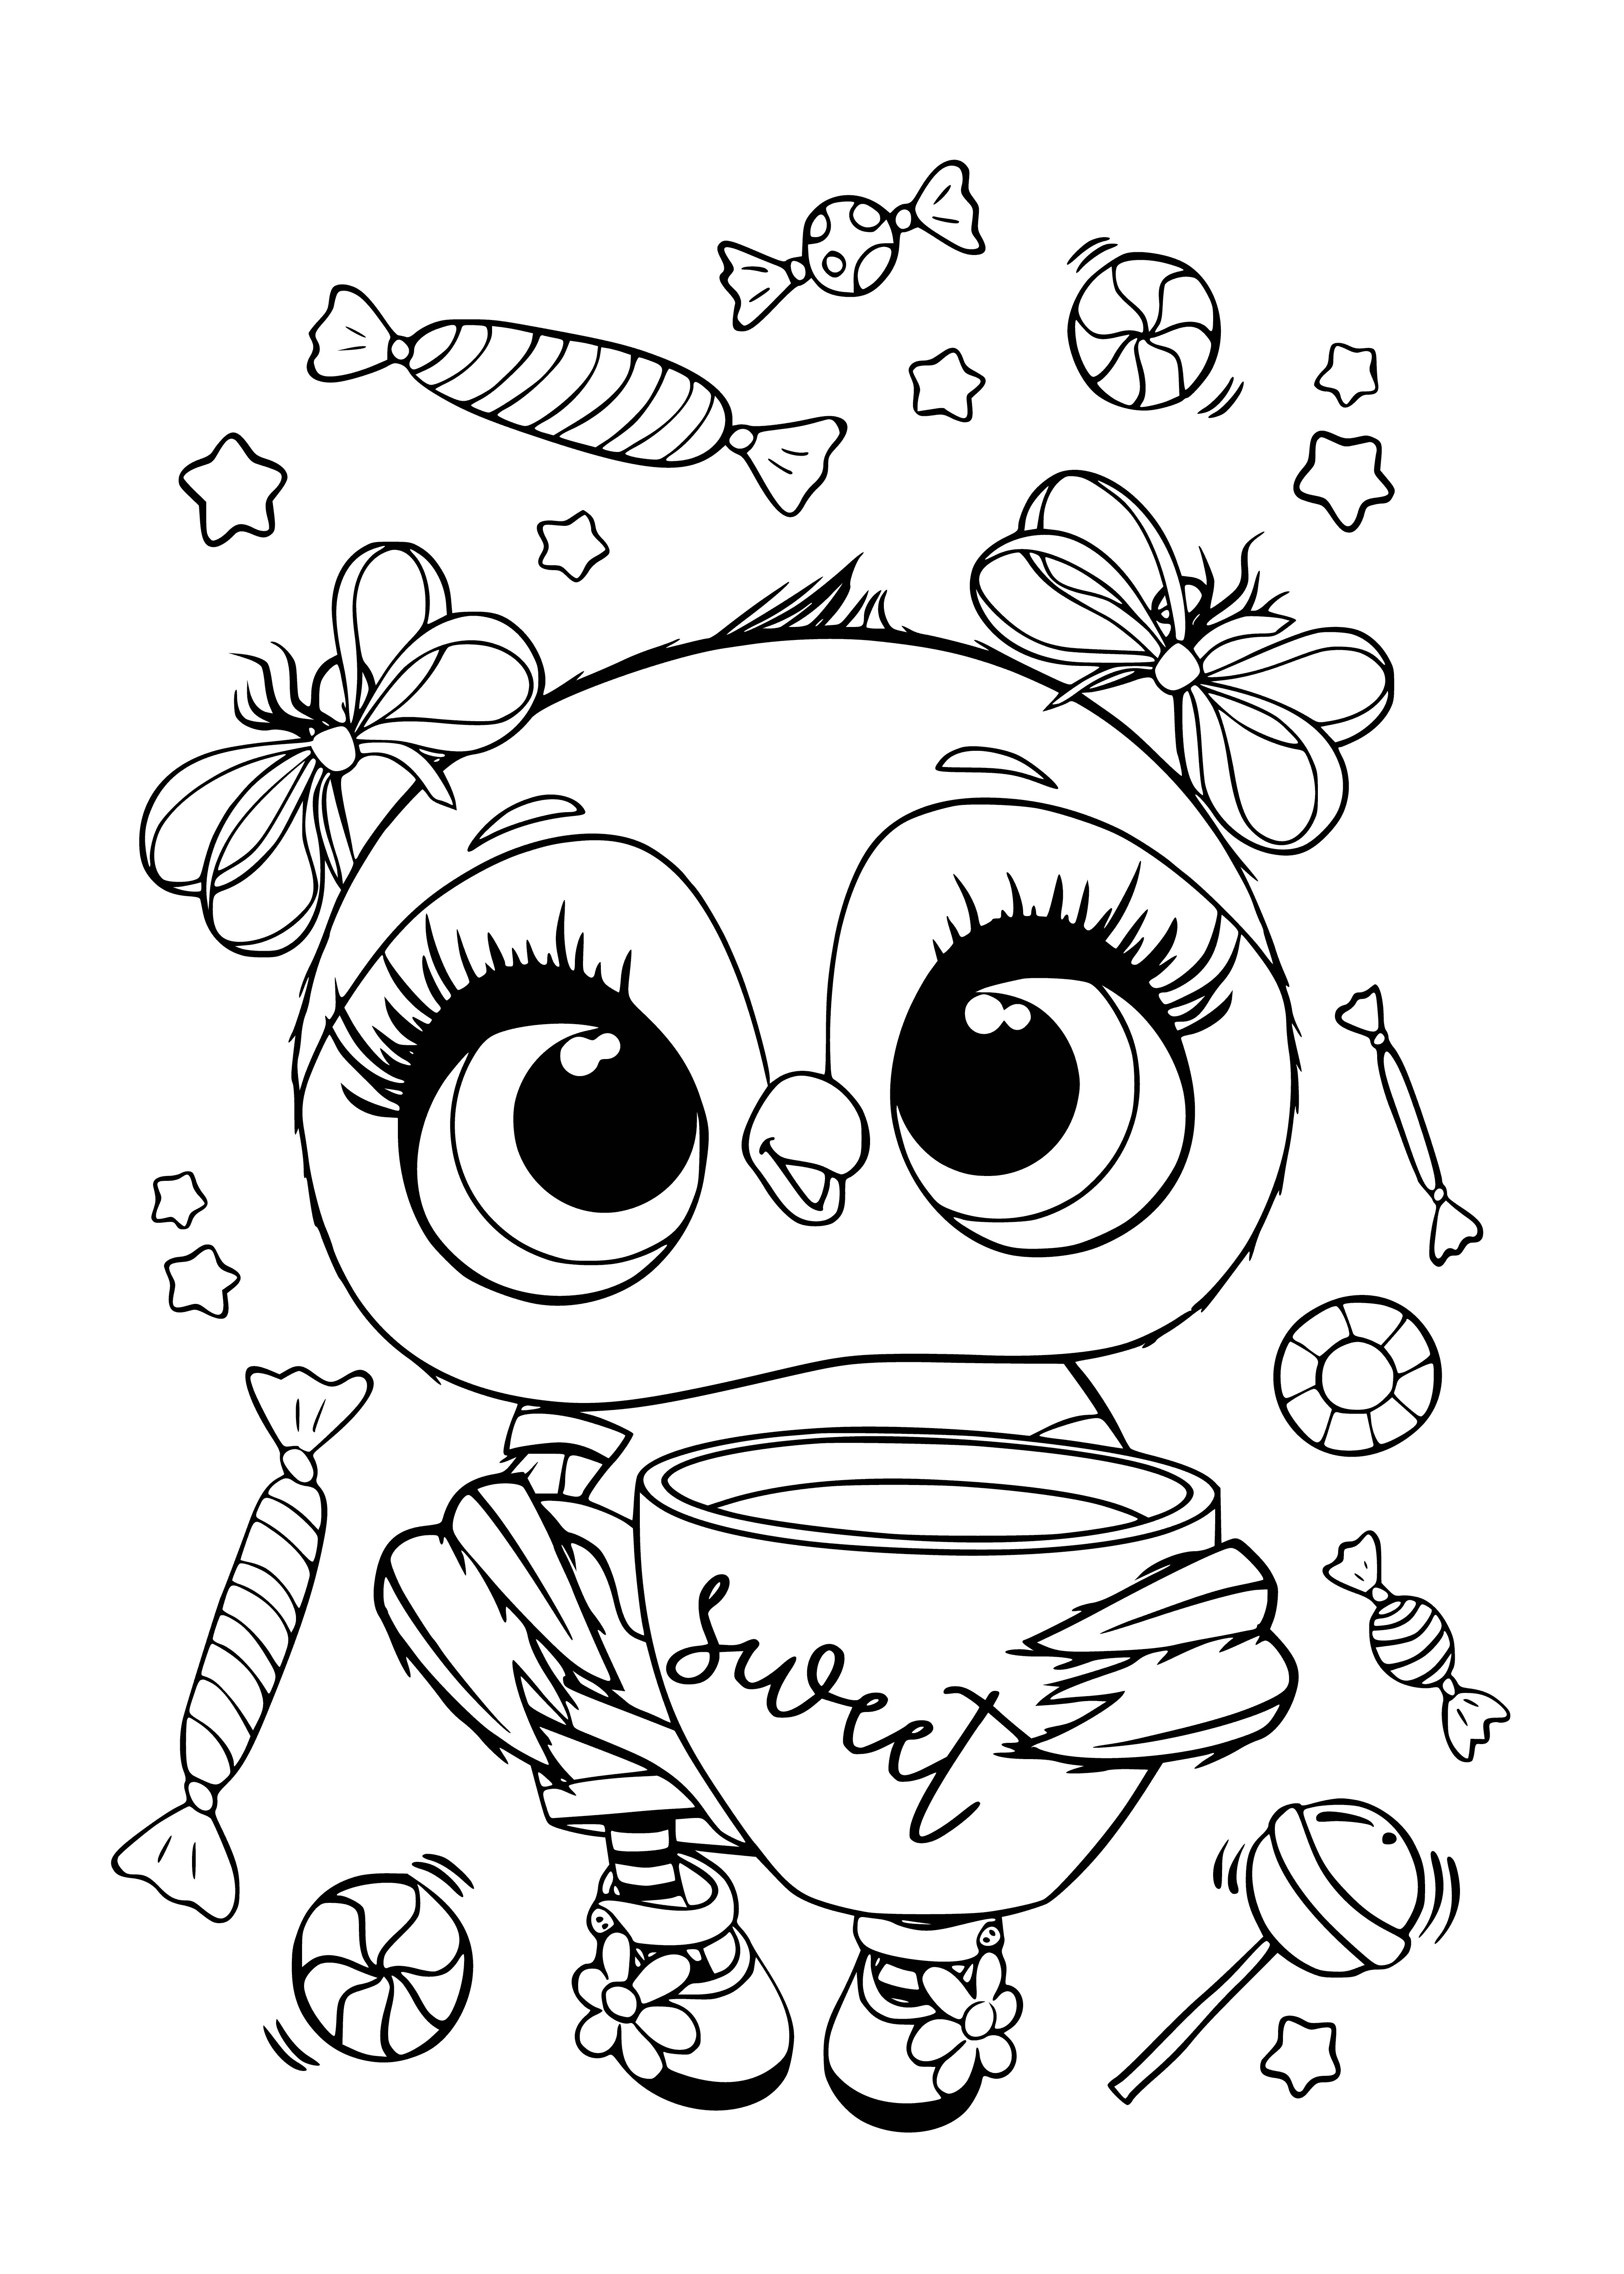 coloring page: Cute chick surrounded by flowery, pink background perfect for coloring! #ColorMeCute #ChickKawaii